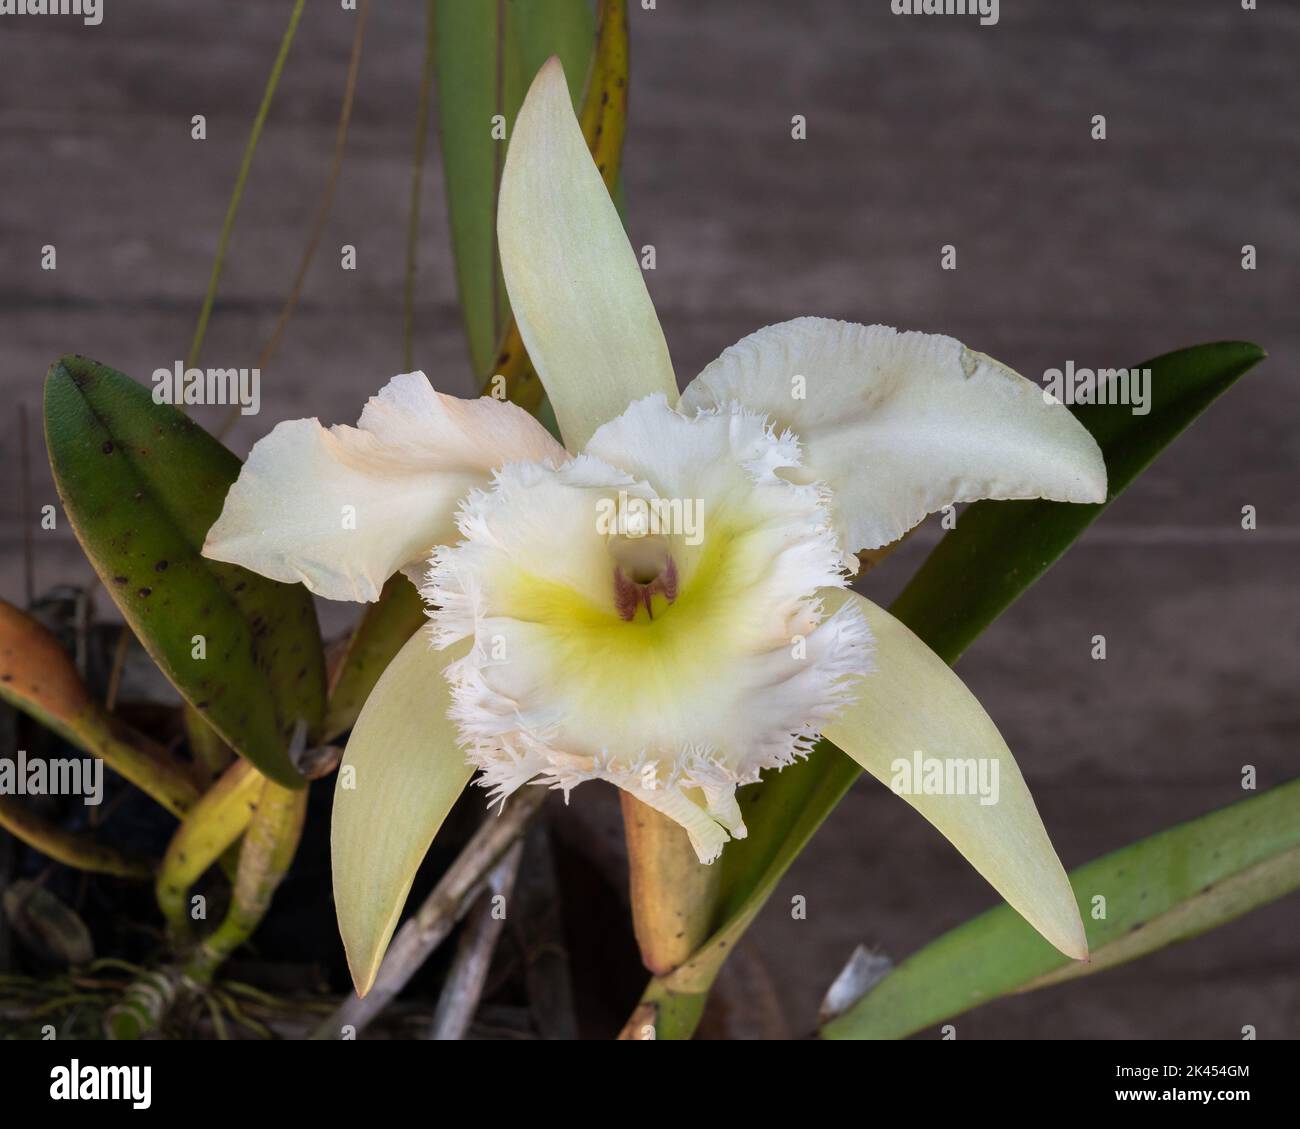 Closeup view of beautiful delicate ivory white and yellow cattleya hybrid orchid flower isolated on natural wooden background Stock Photo